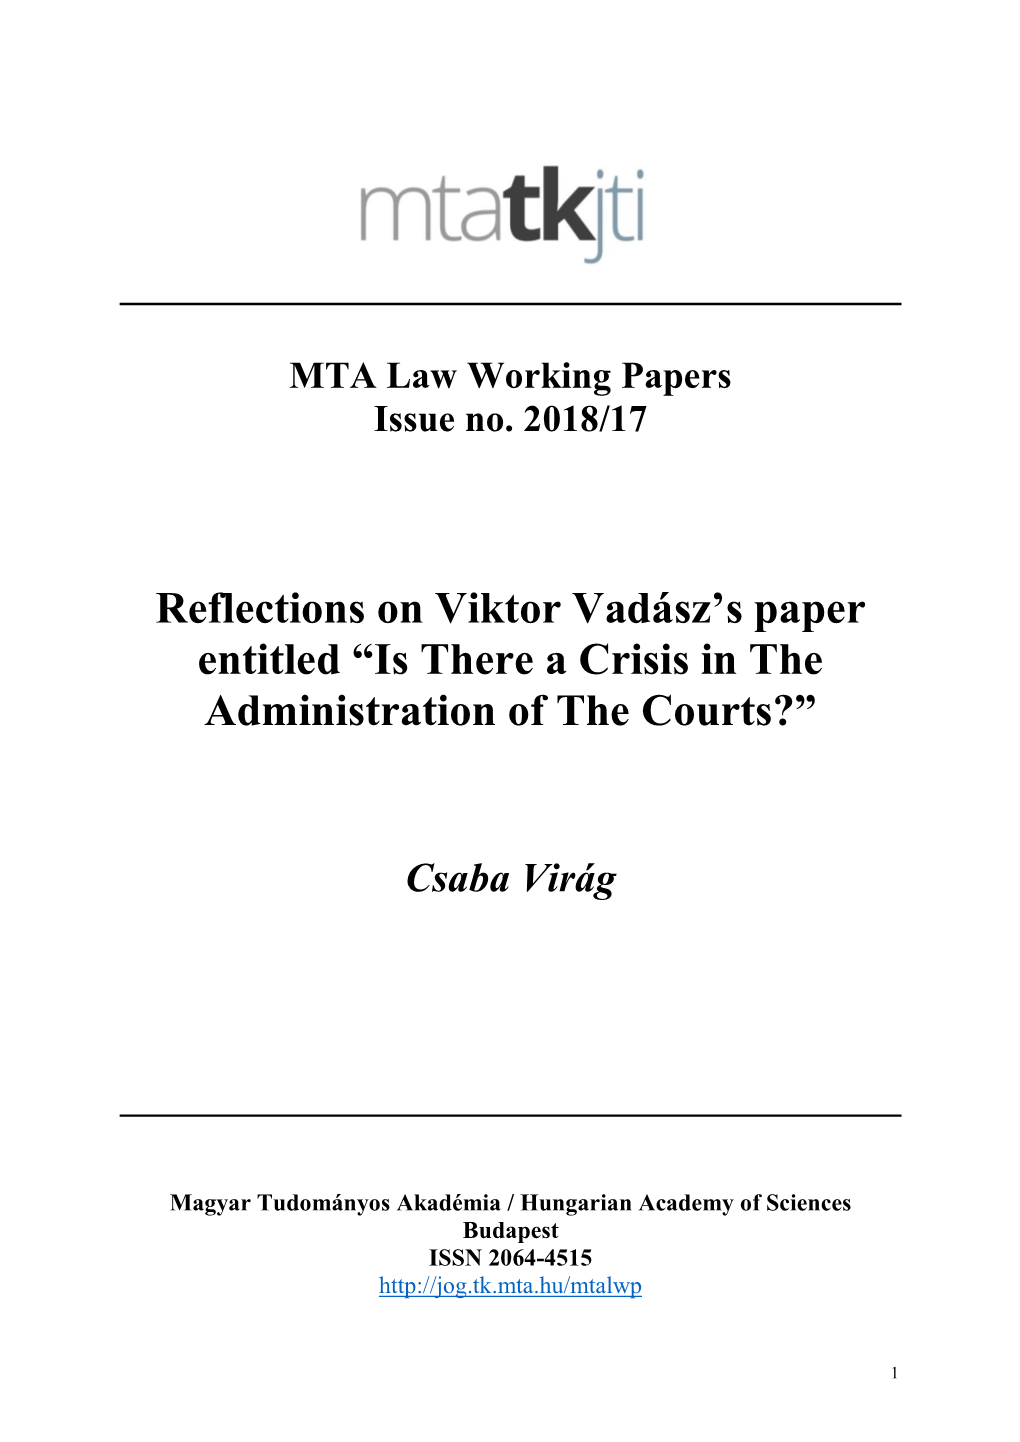 Reflections on Viktor Vadász's Paper Entitled “Is There a Crisis in The